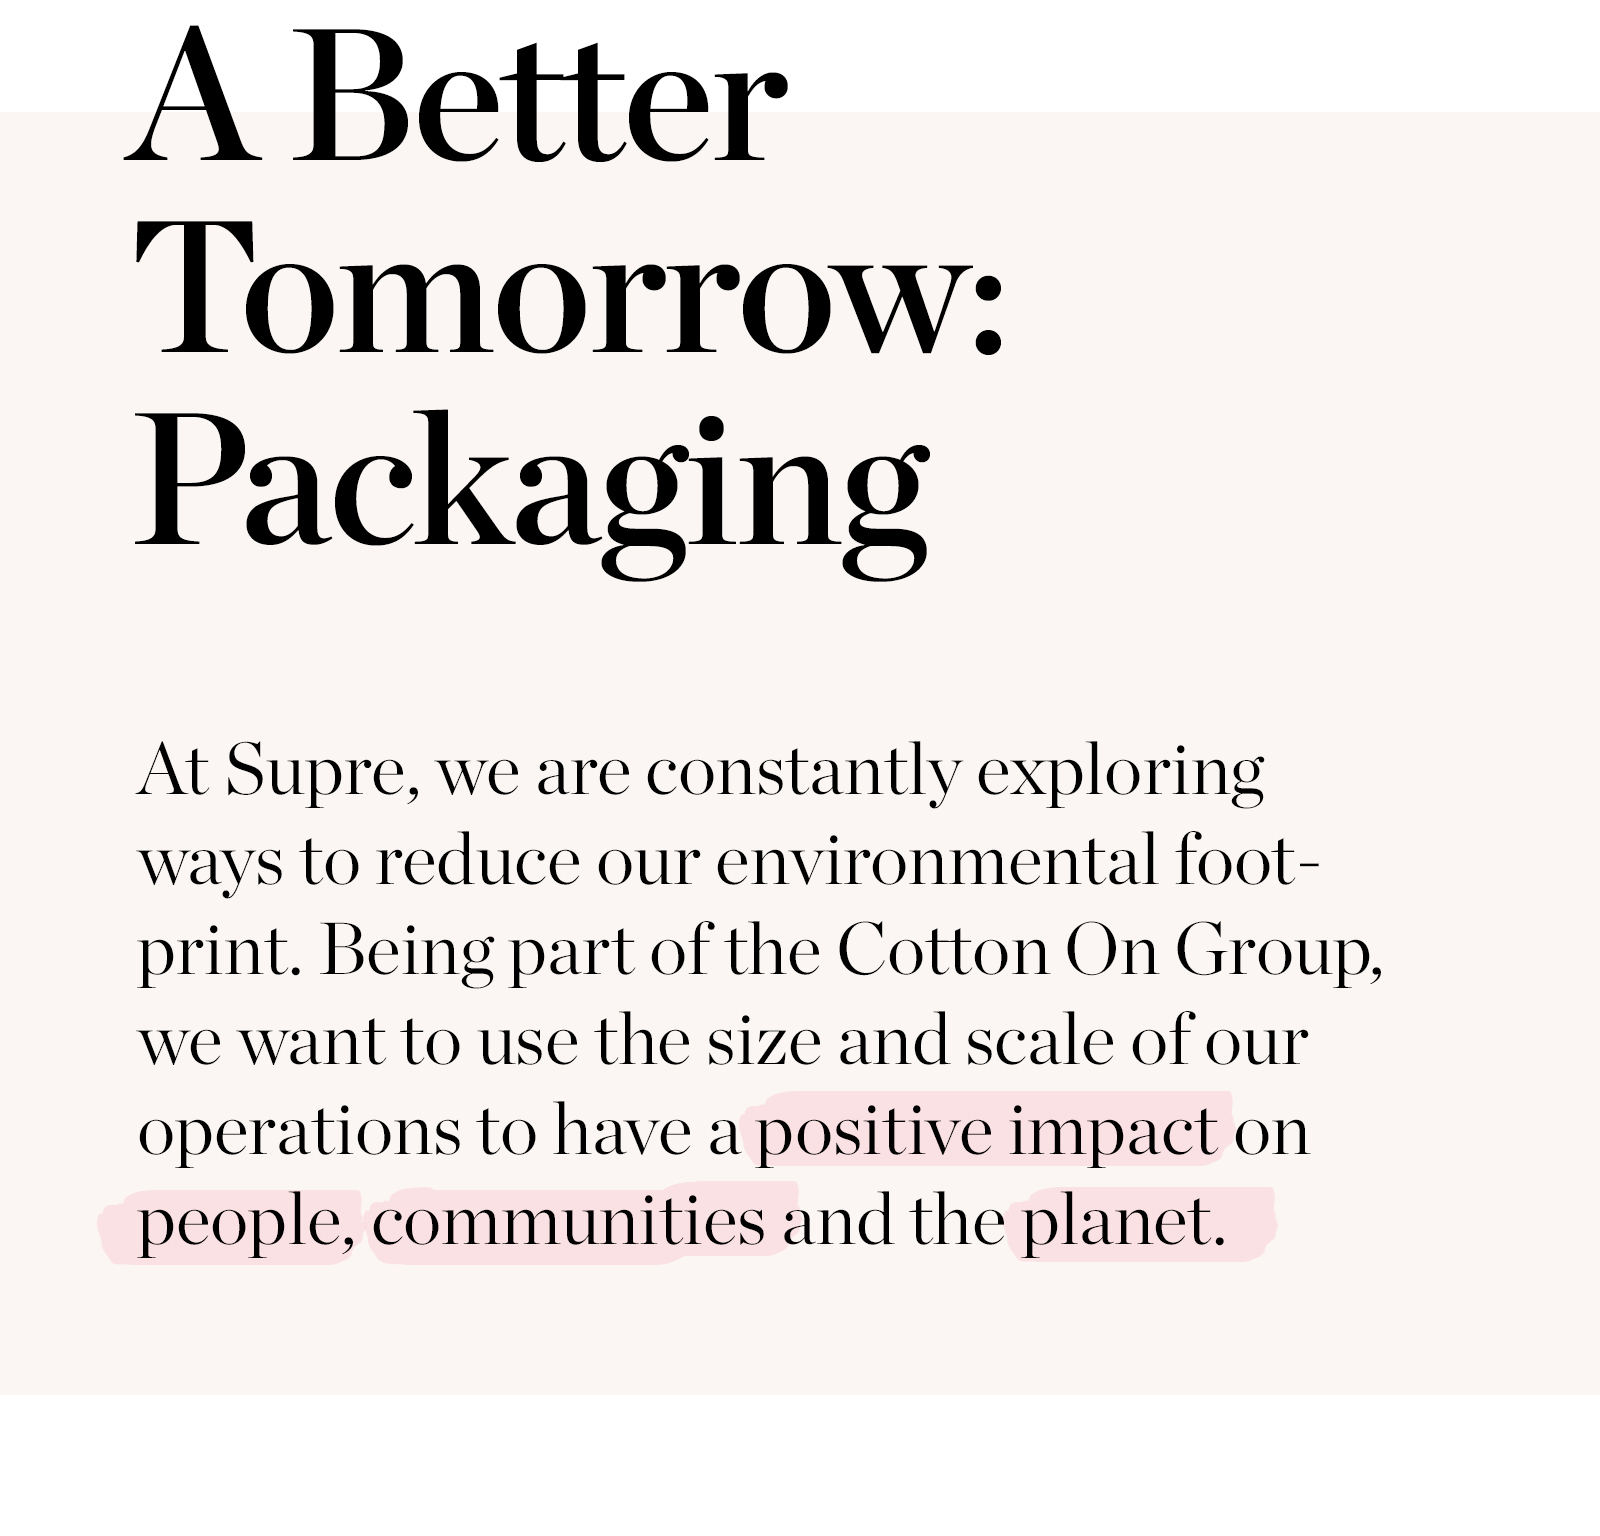 A Better Tomorrow - Packaging  